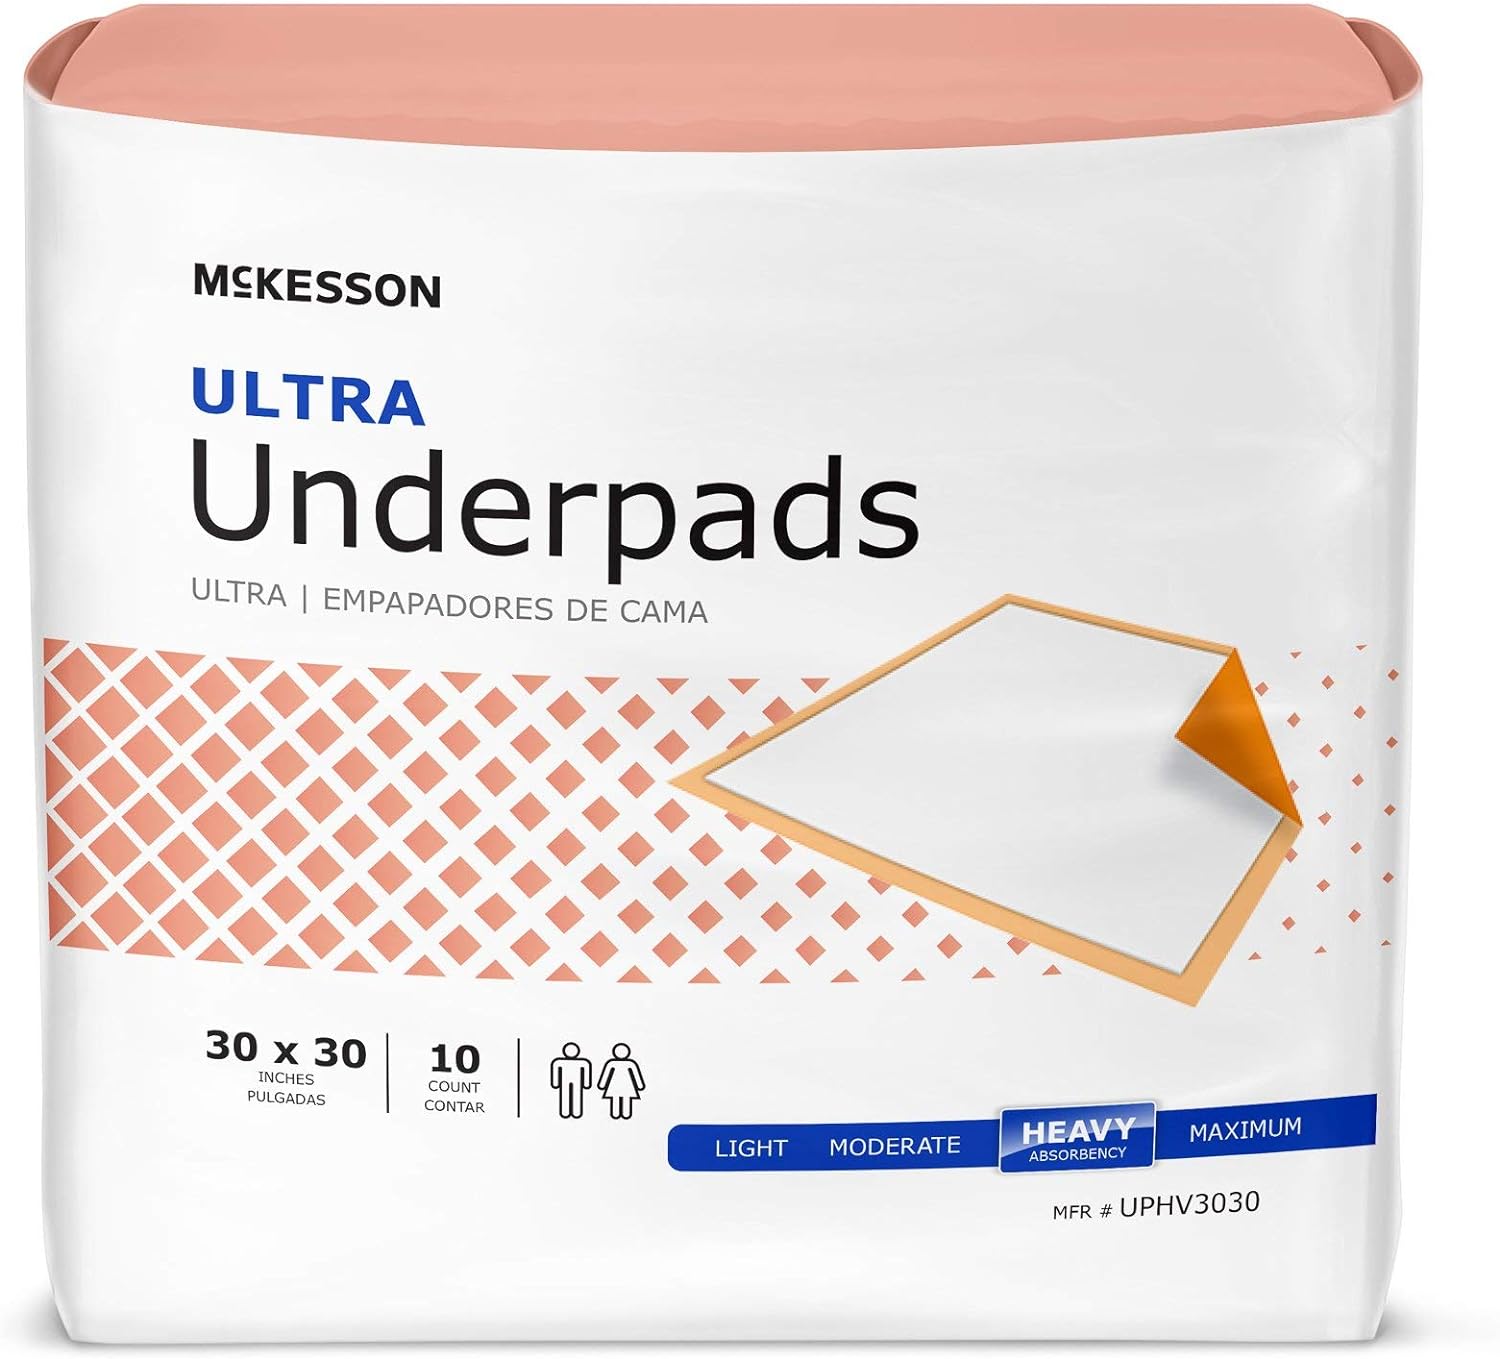 McKesson Ultra Underpads, Incontinence Bed Pads, Heavy Absorbency, 30 in x 30 in, 100 Count